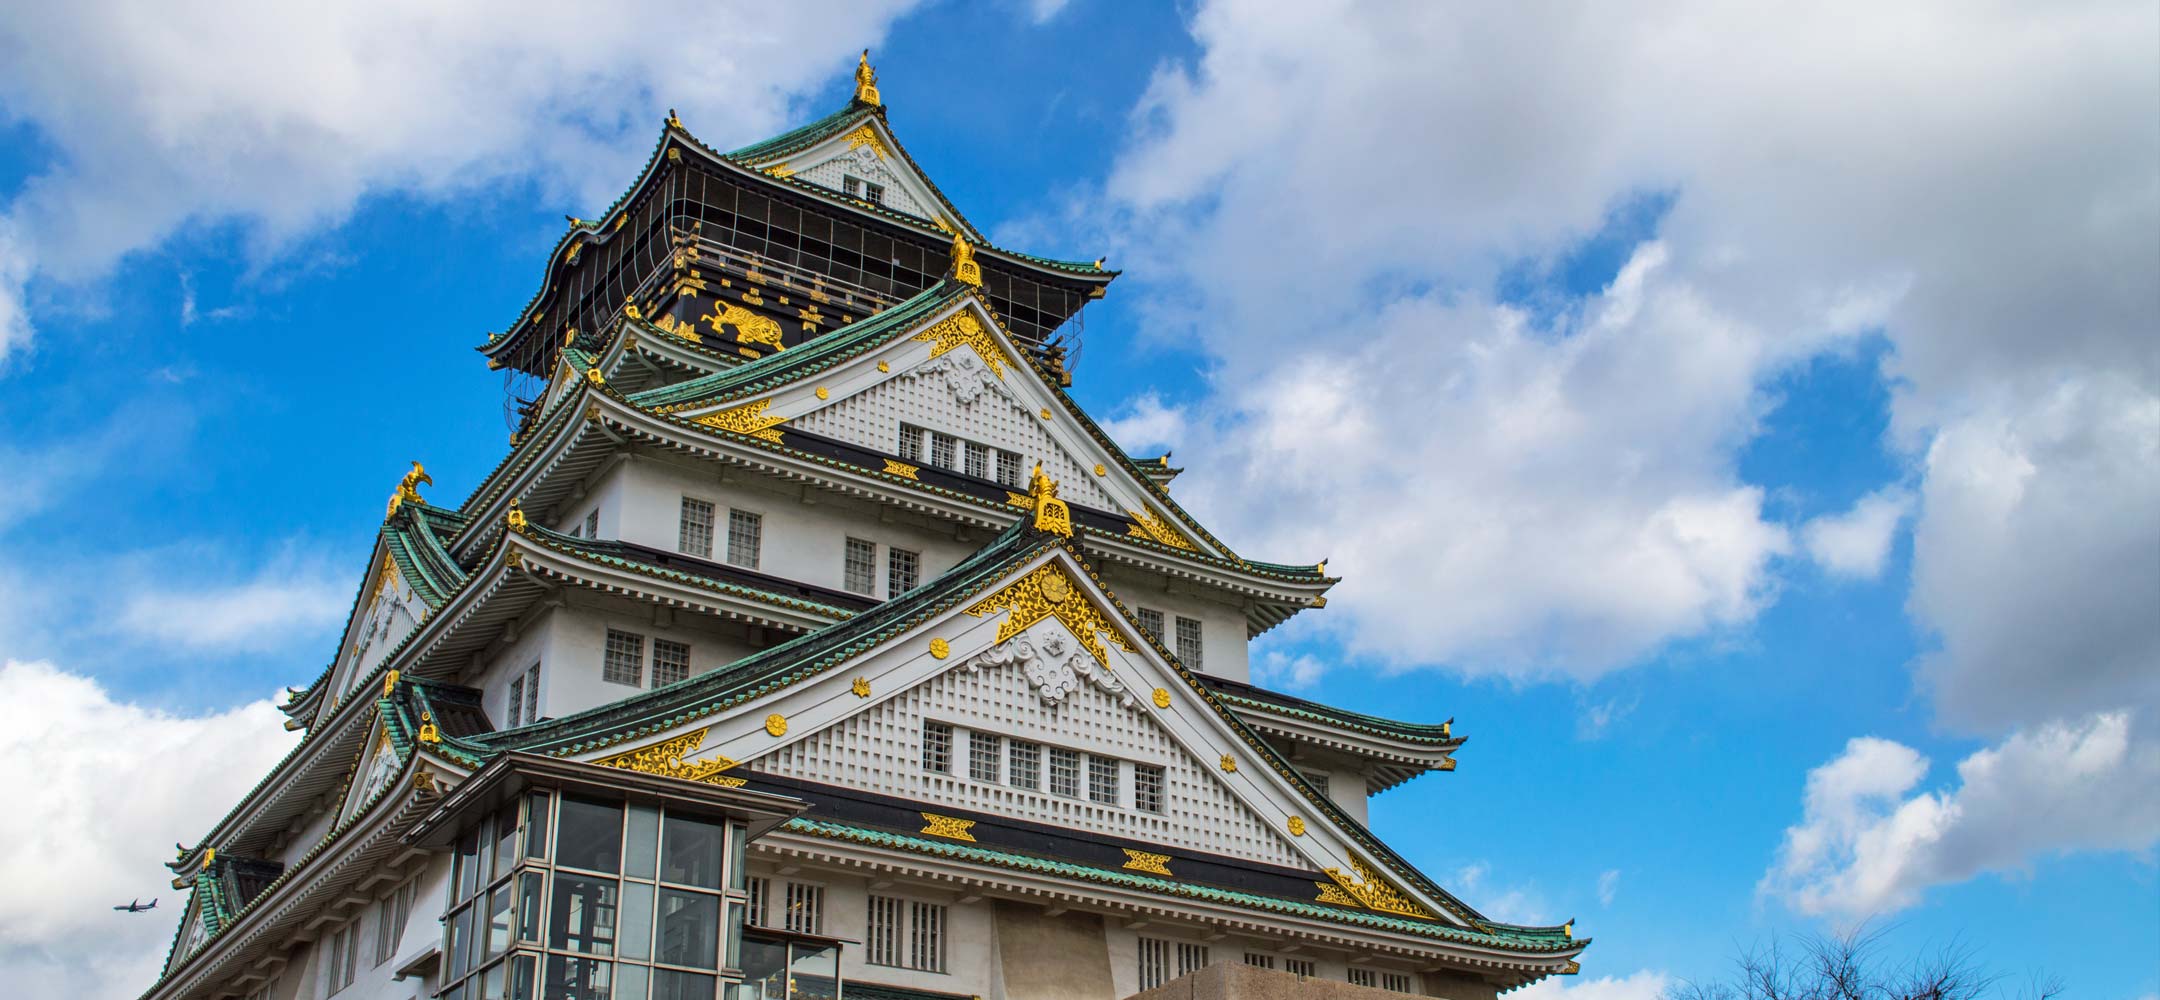 Grab 2015 by the horns  InsideJapan Tours recommends where to go and why  during the Asian Year of the Ram 